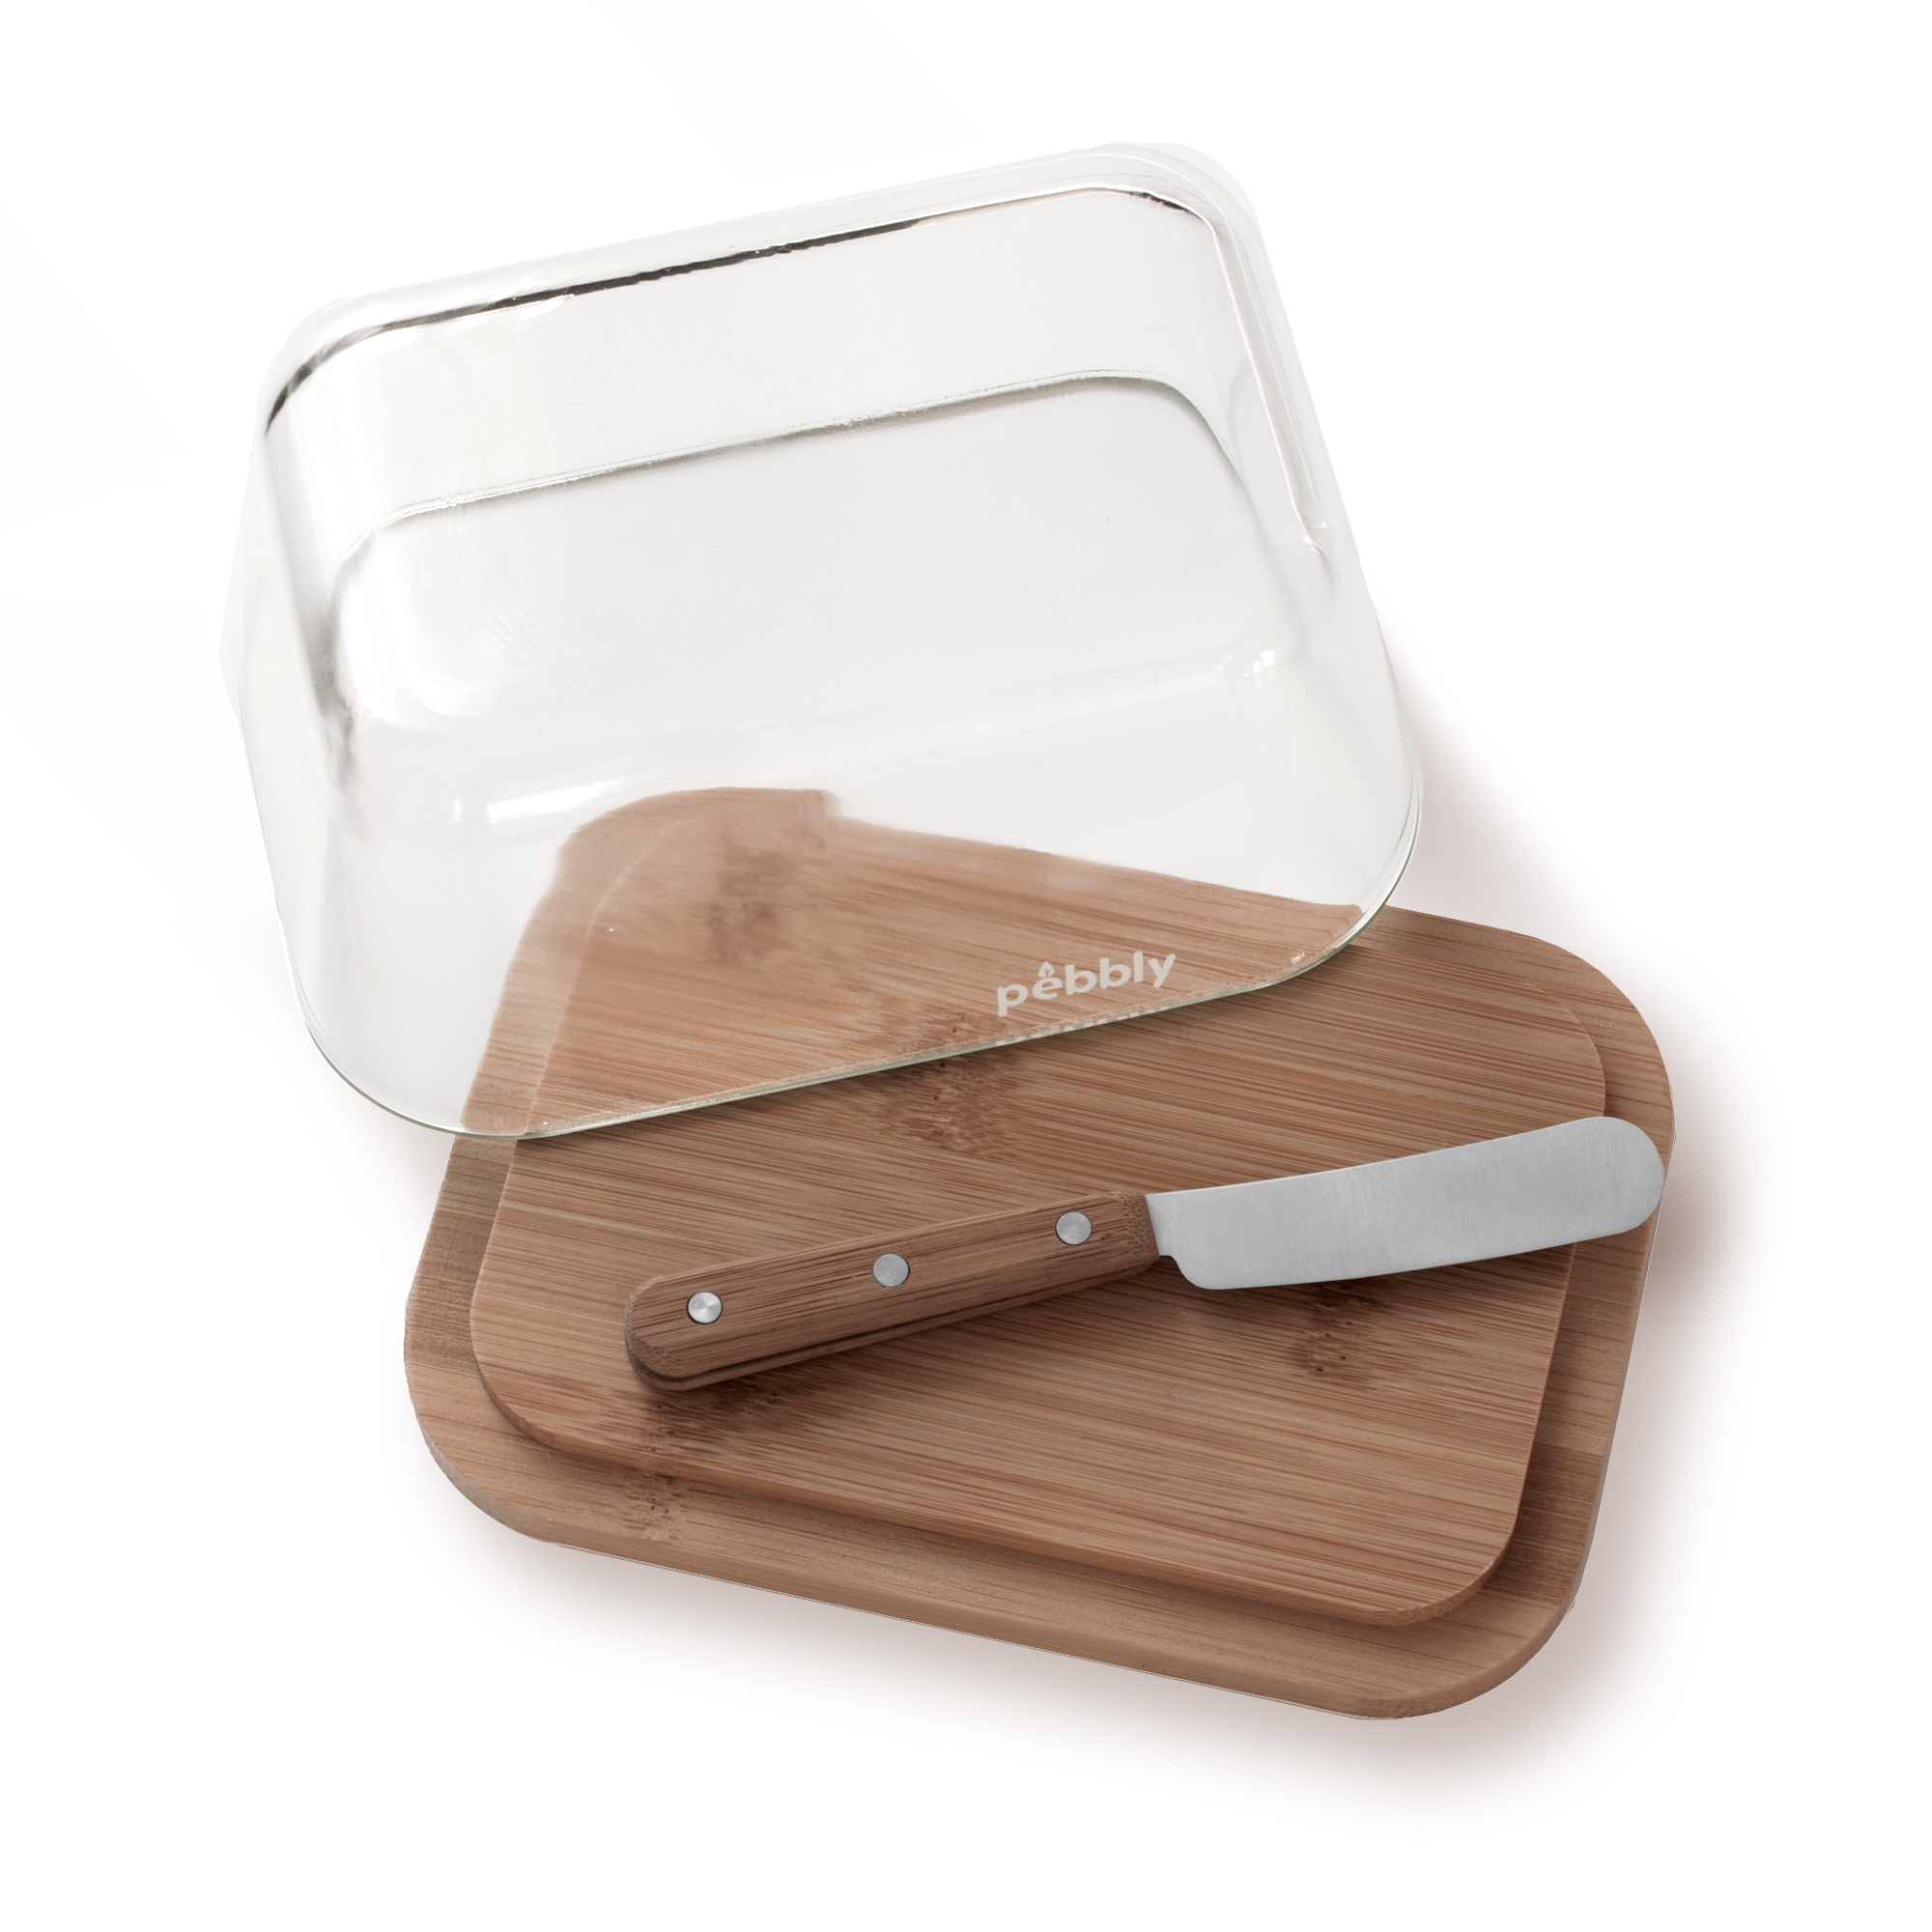 Pebbly - Butter Dish with Knife - Bamboo